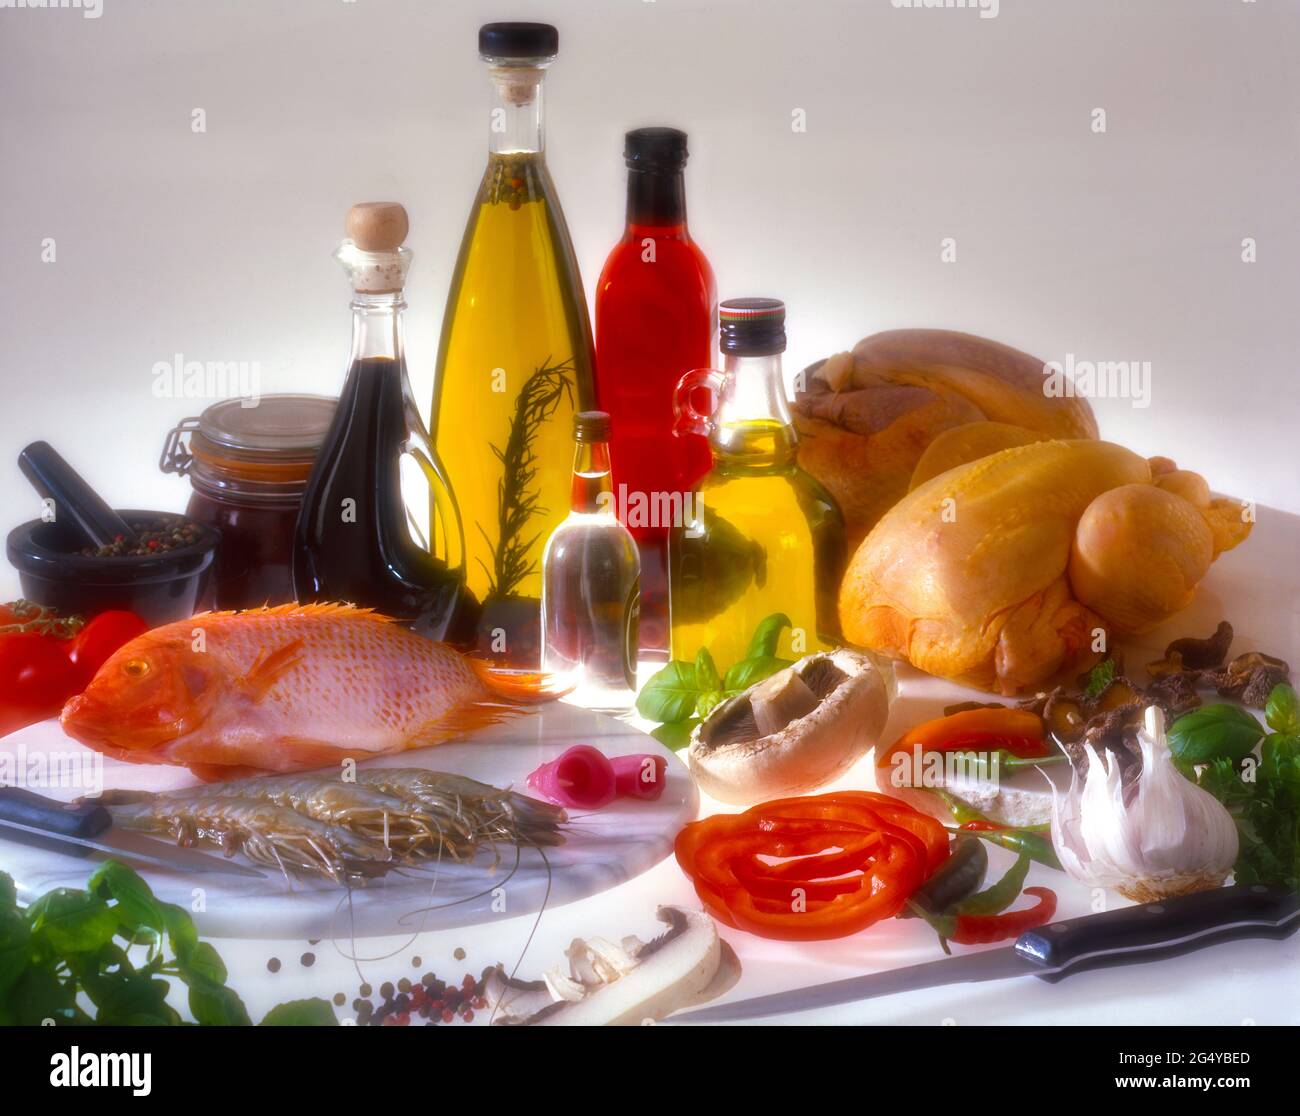 Five glass bottles containing coloured liquids raw iingredients poultry, fish prawns garlic mushrooms red peppers pestle & mortar on white copy space Stock Photo